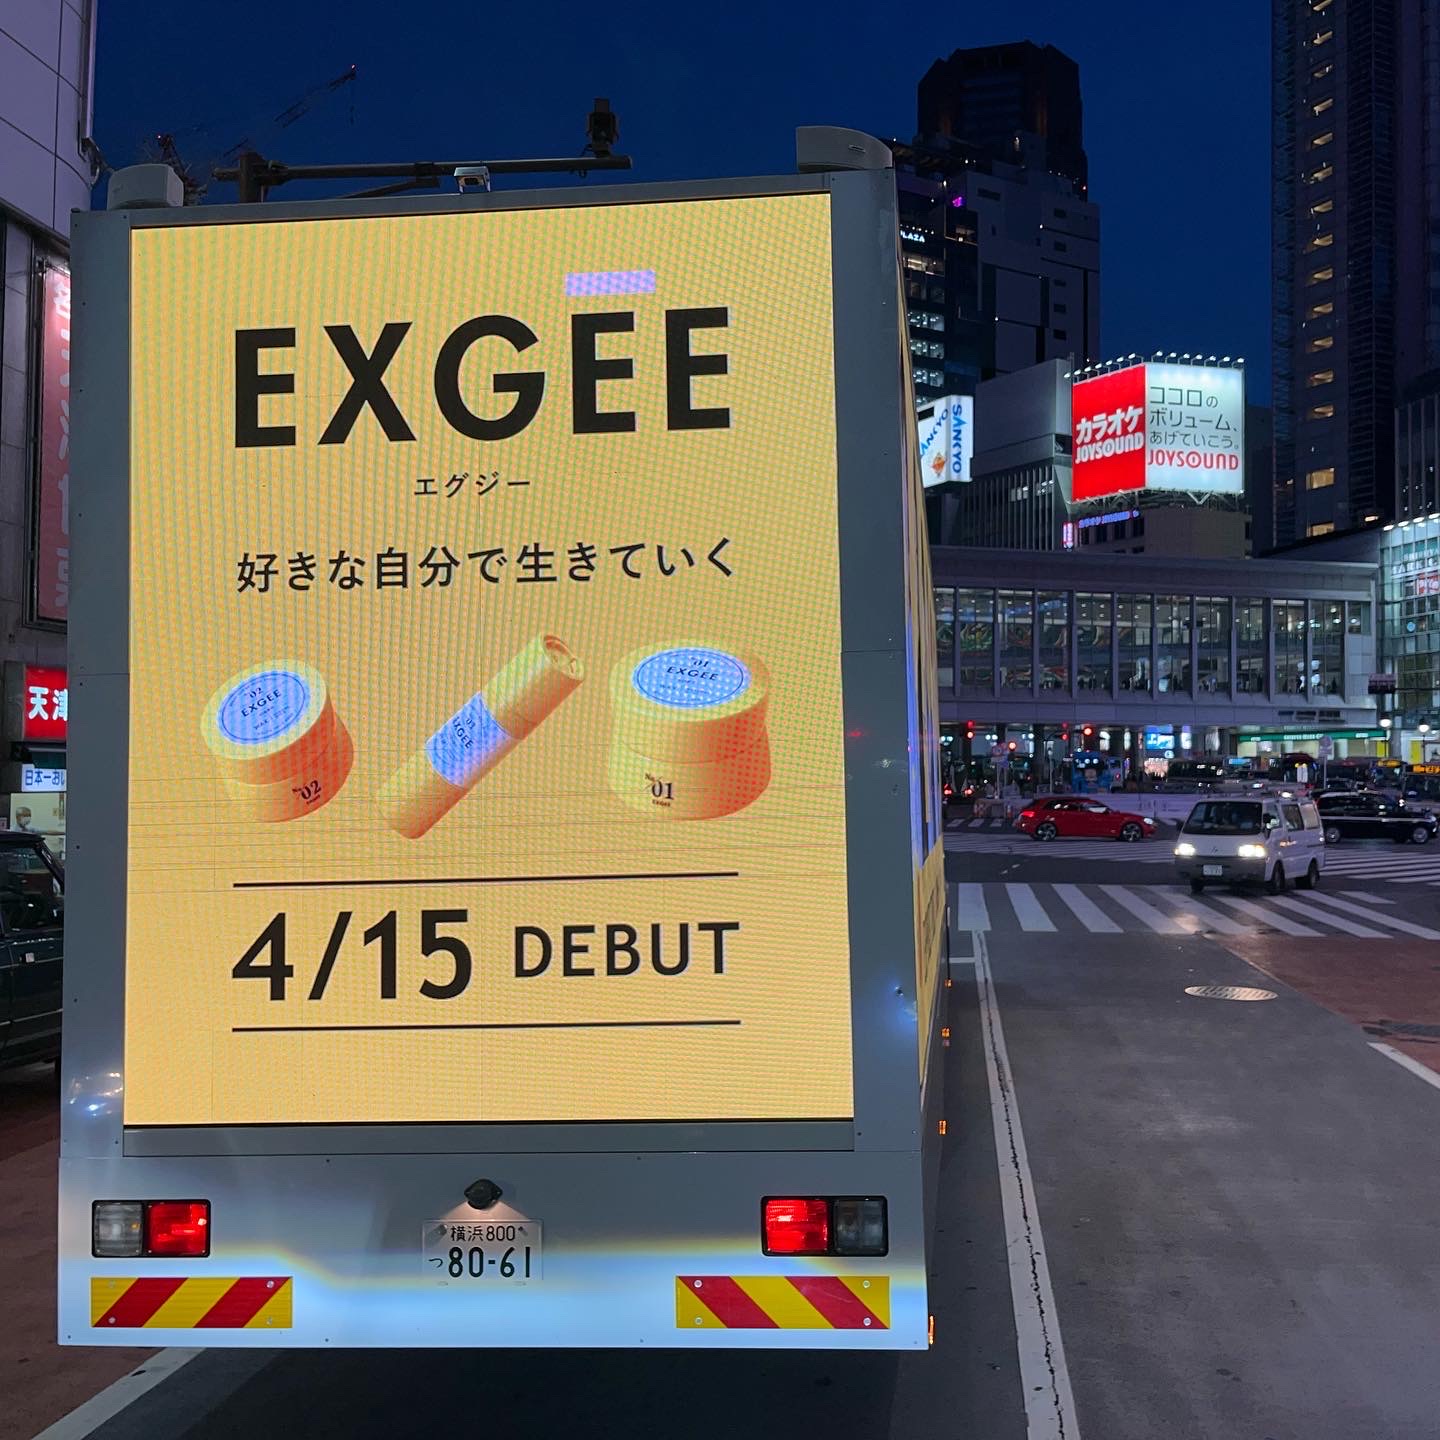 EXGEE